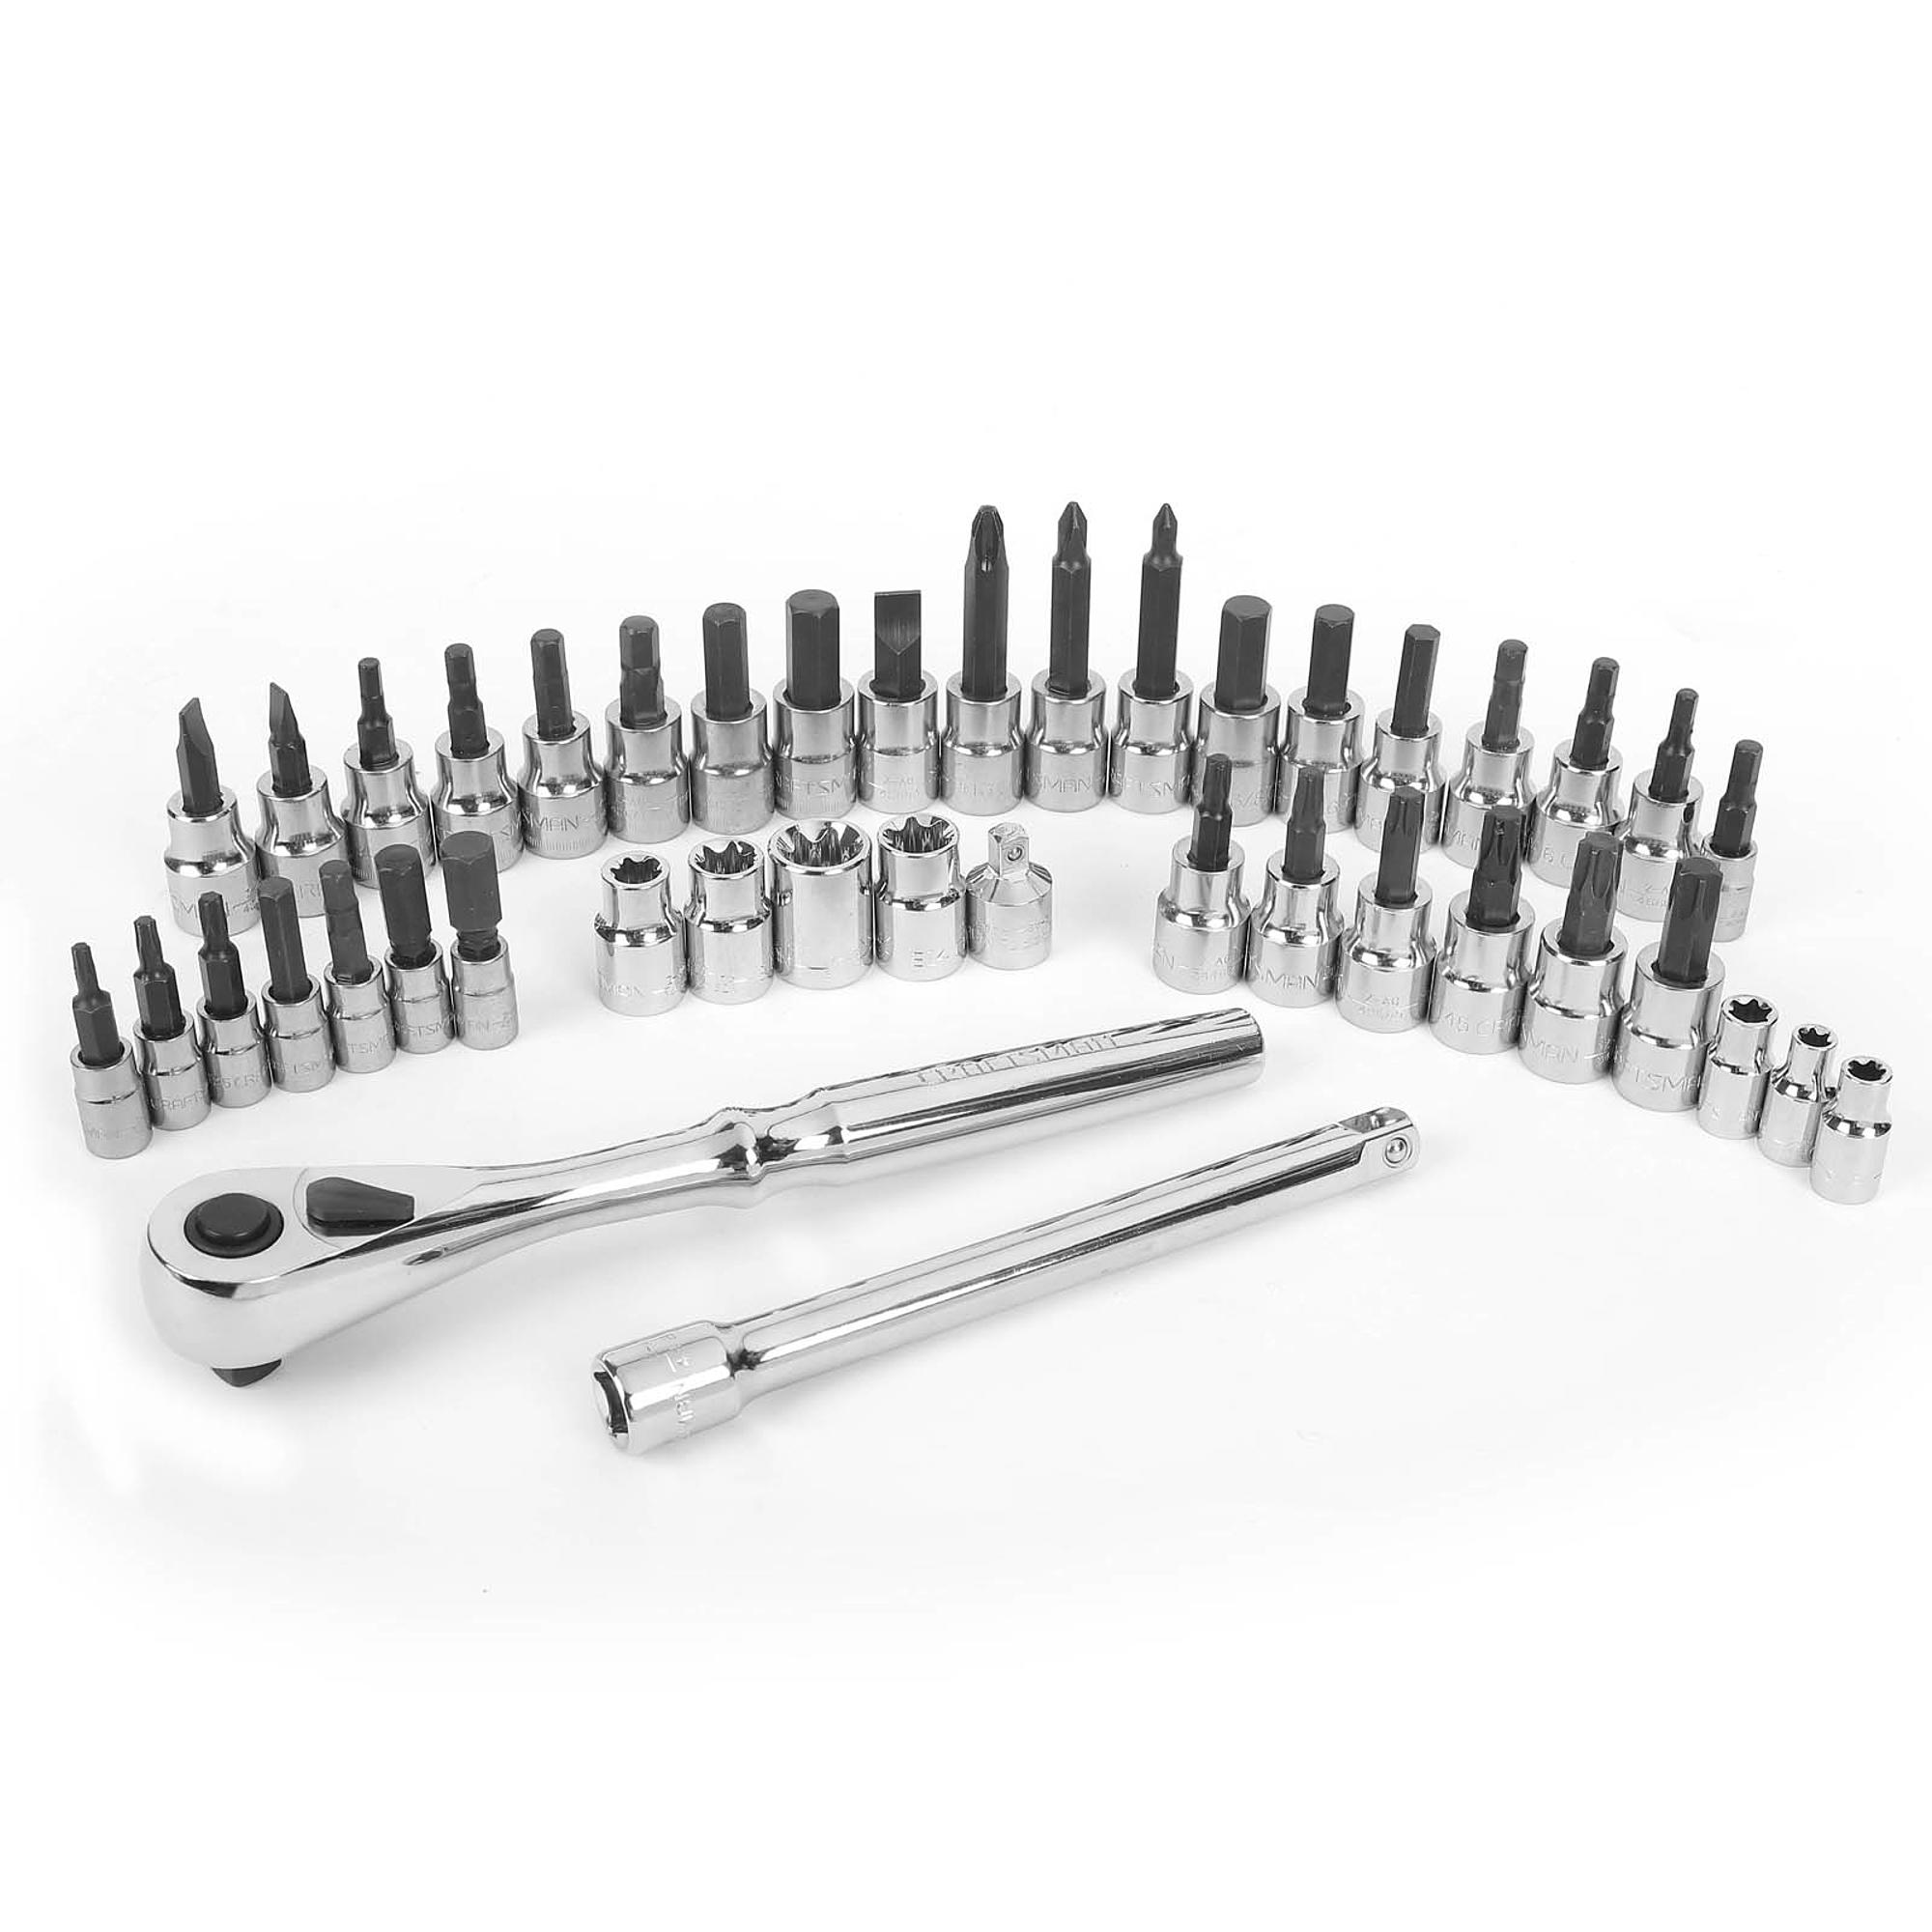 Craftsman 42 piece 1/4 and 3/8-inch Drive Bit and Torx Bit Socket Wrench Hand Tool Set 99941 - image 2 of 2